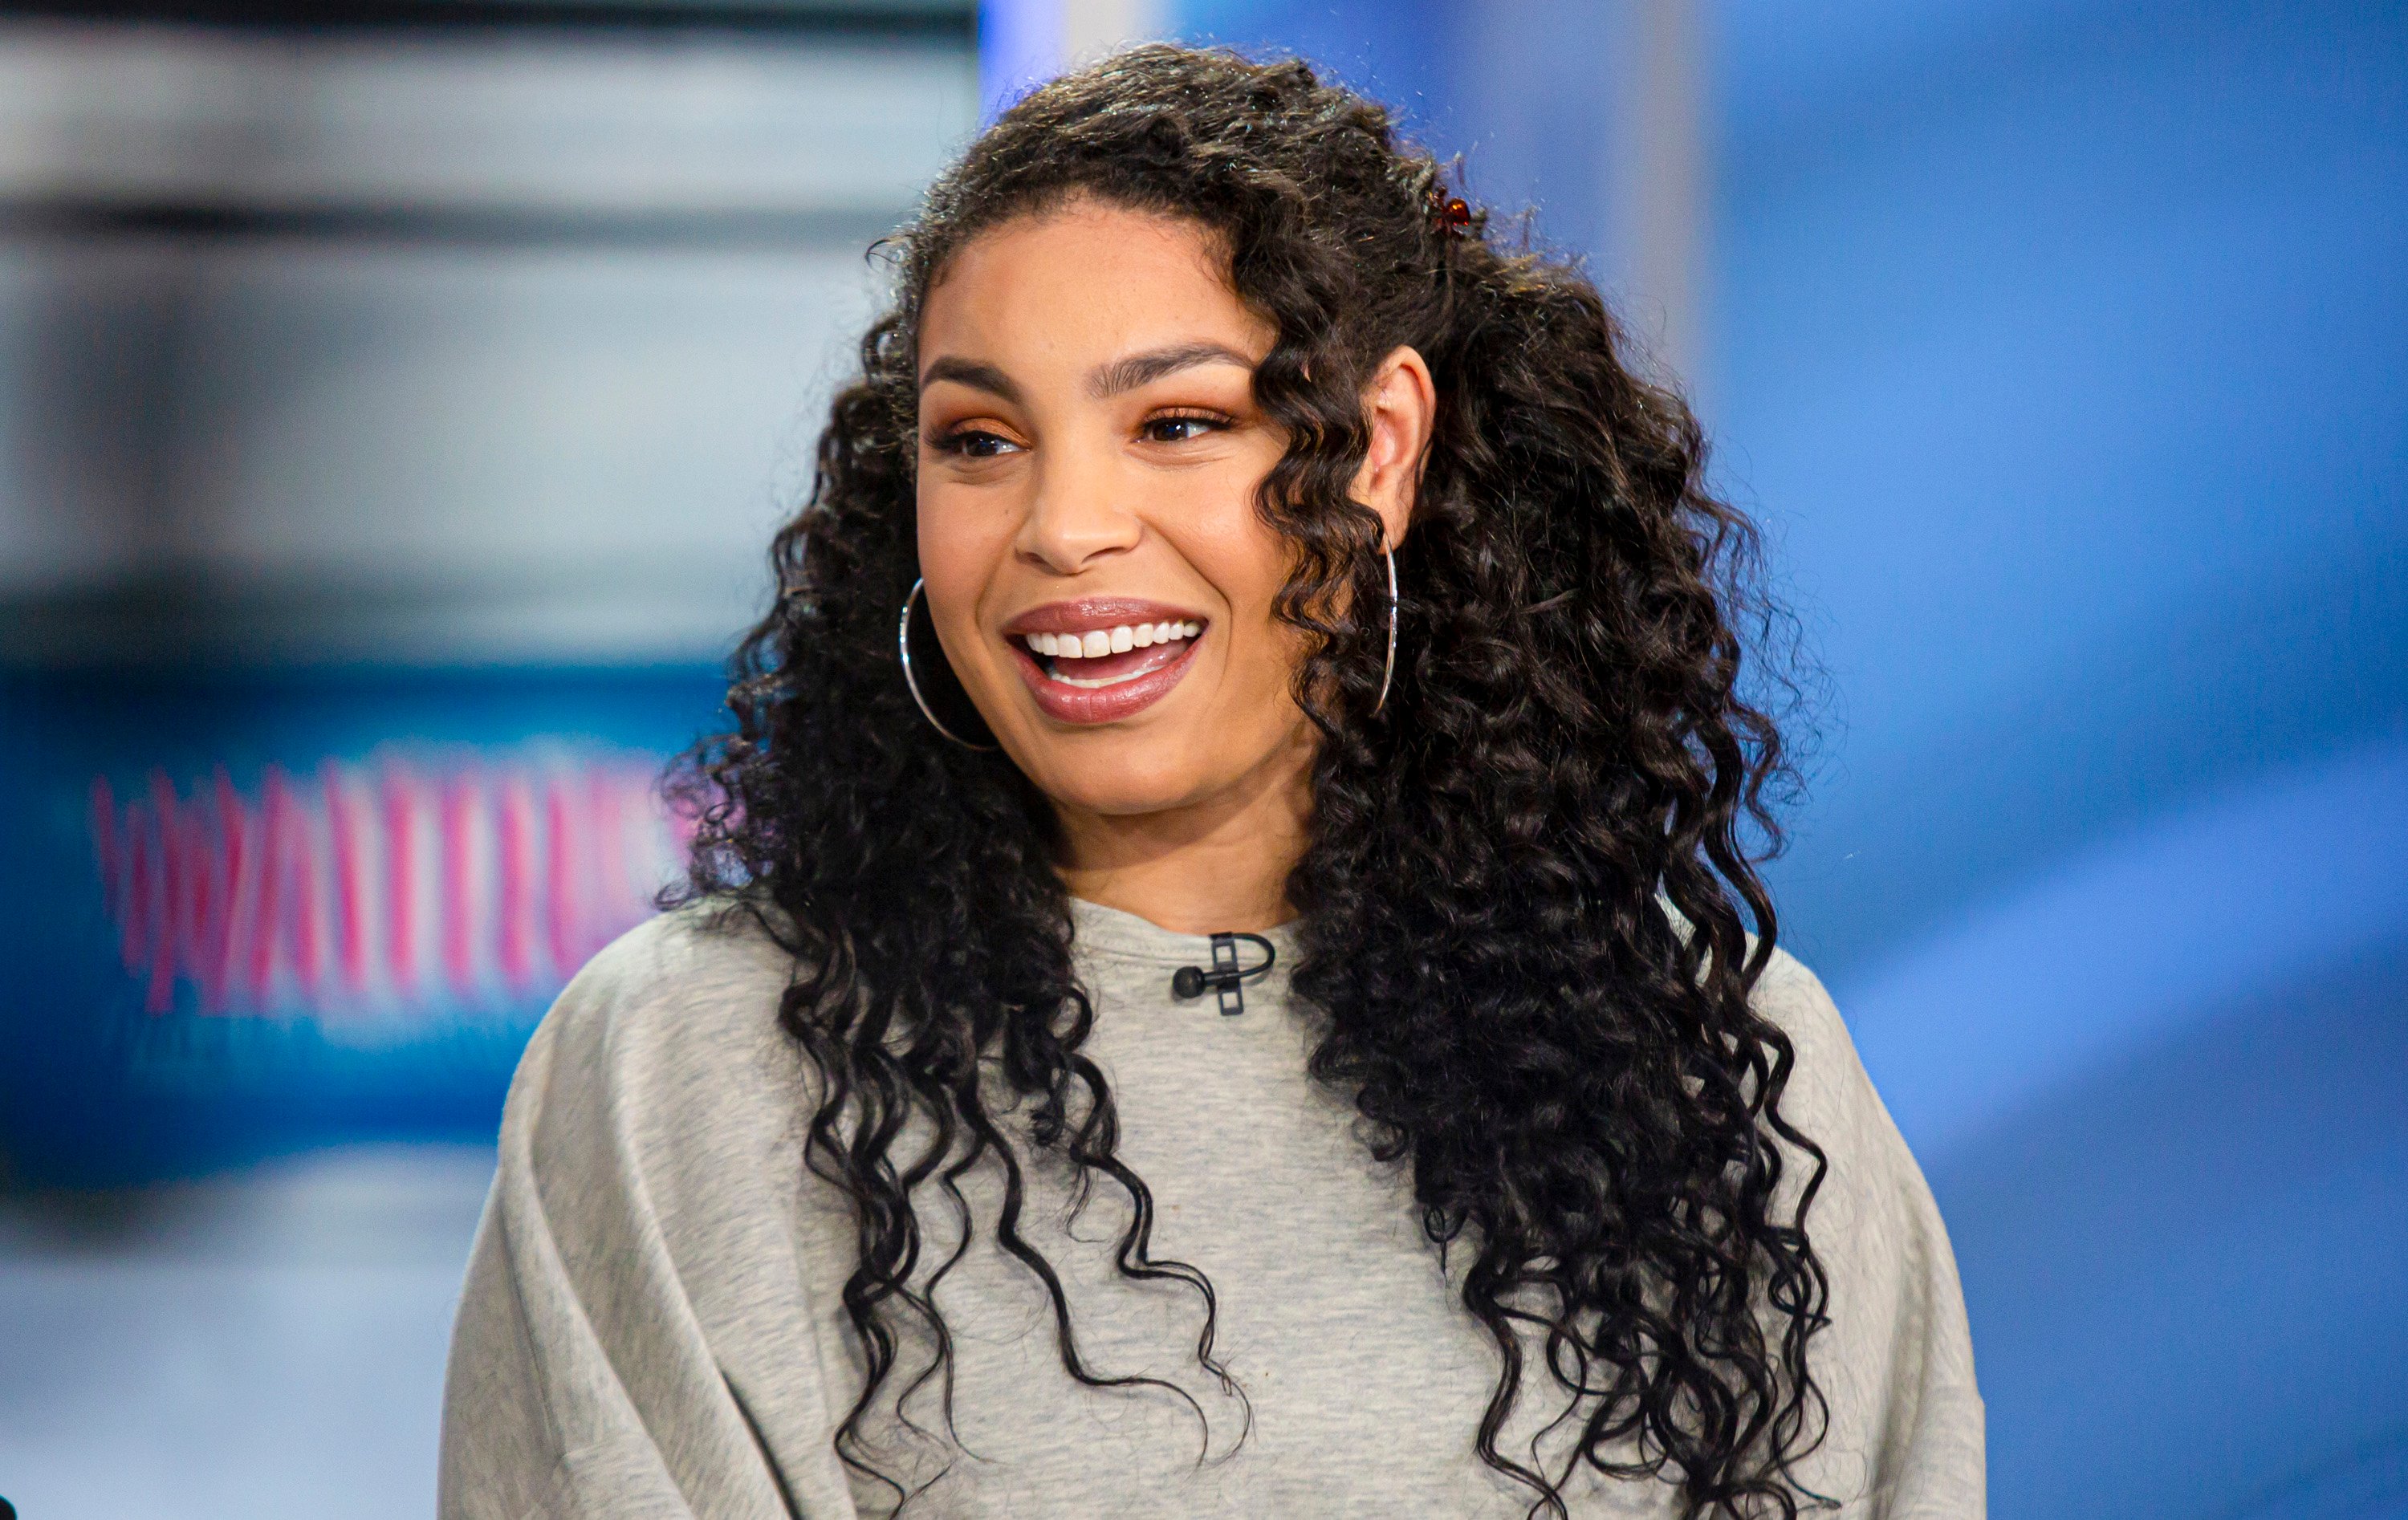 Jordin Sparks, whose new movie is part of Hallmark Countdown to Christmas 2021, smiling in a gray top during an interview on 'Today' 